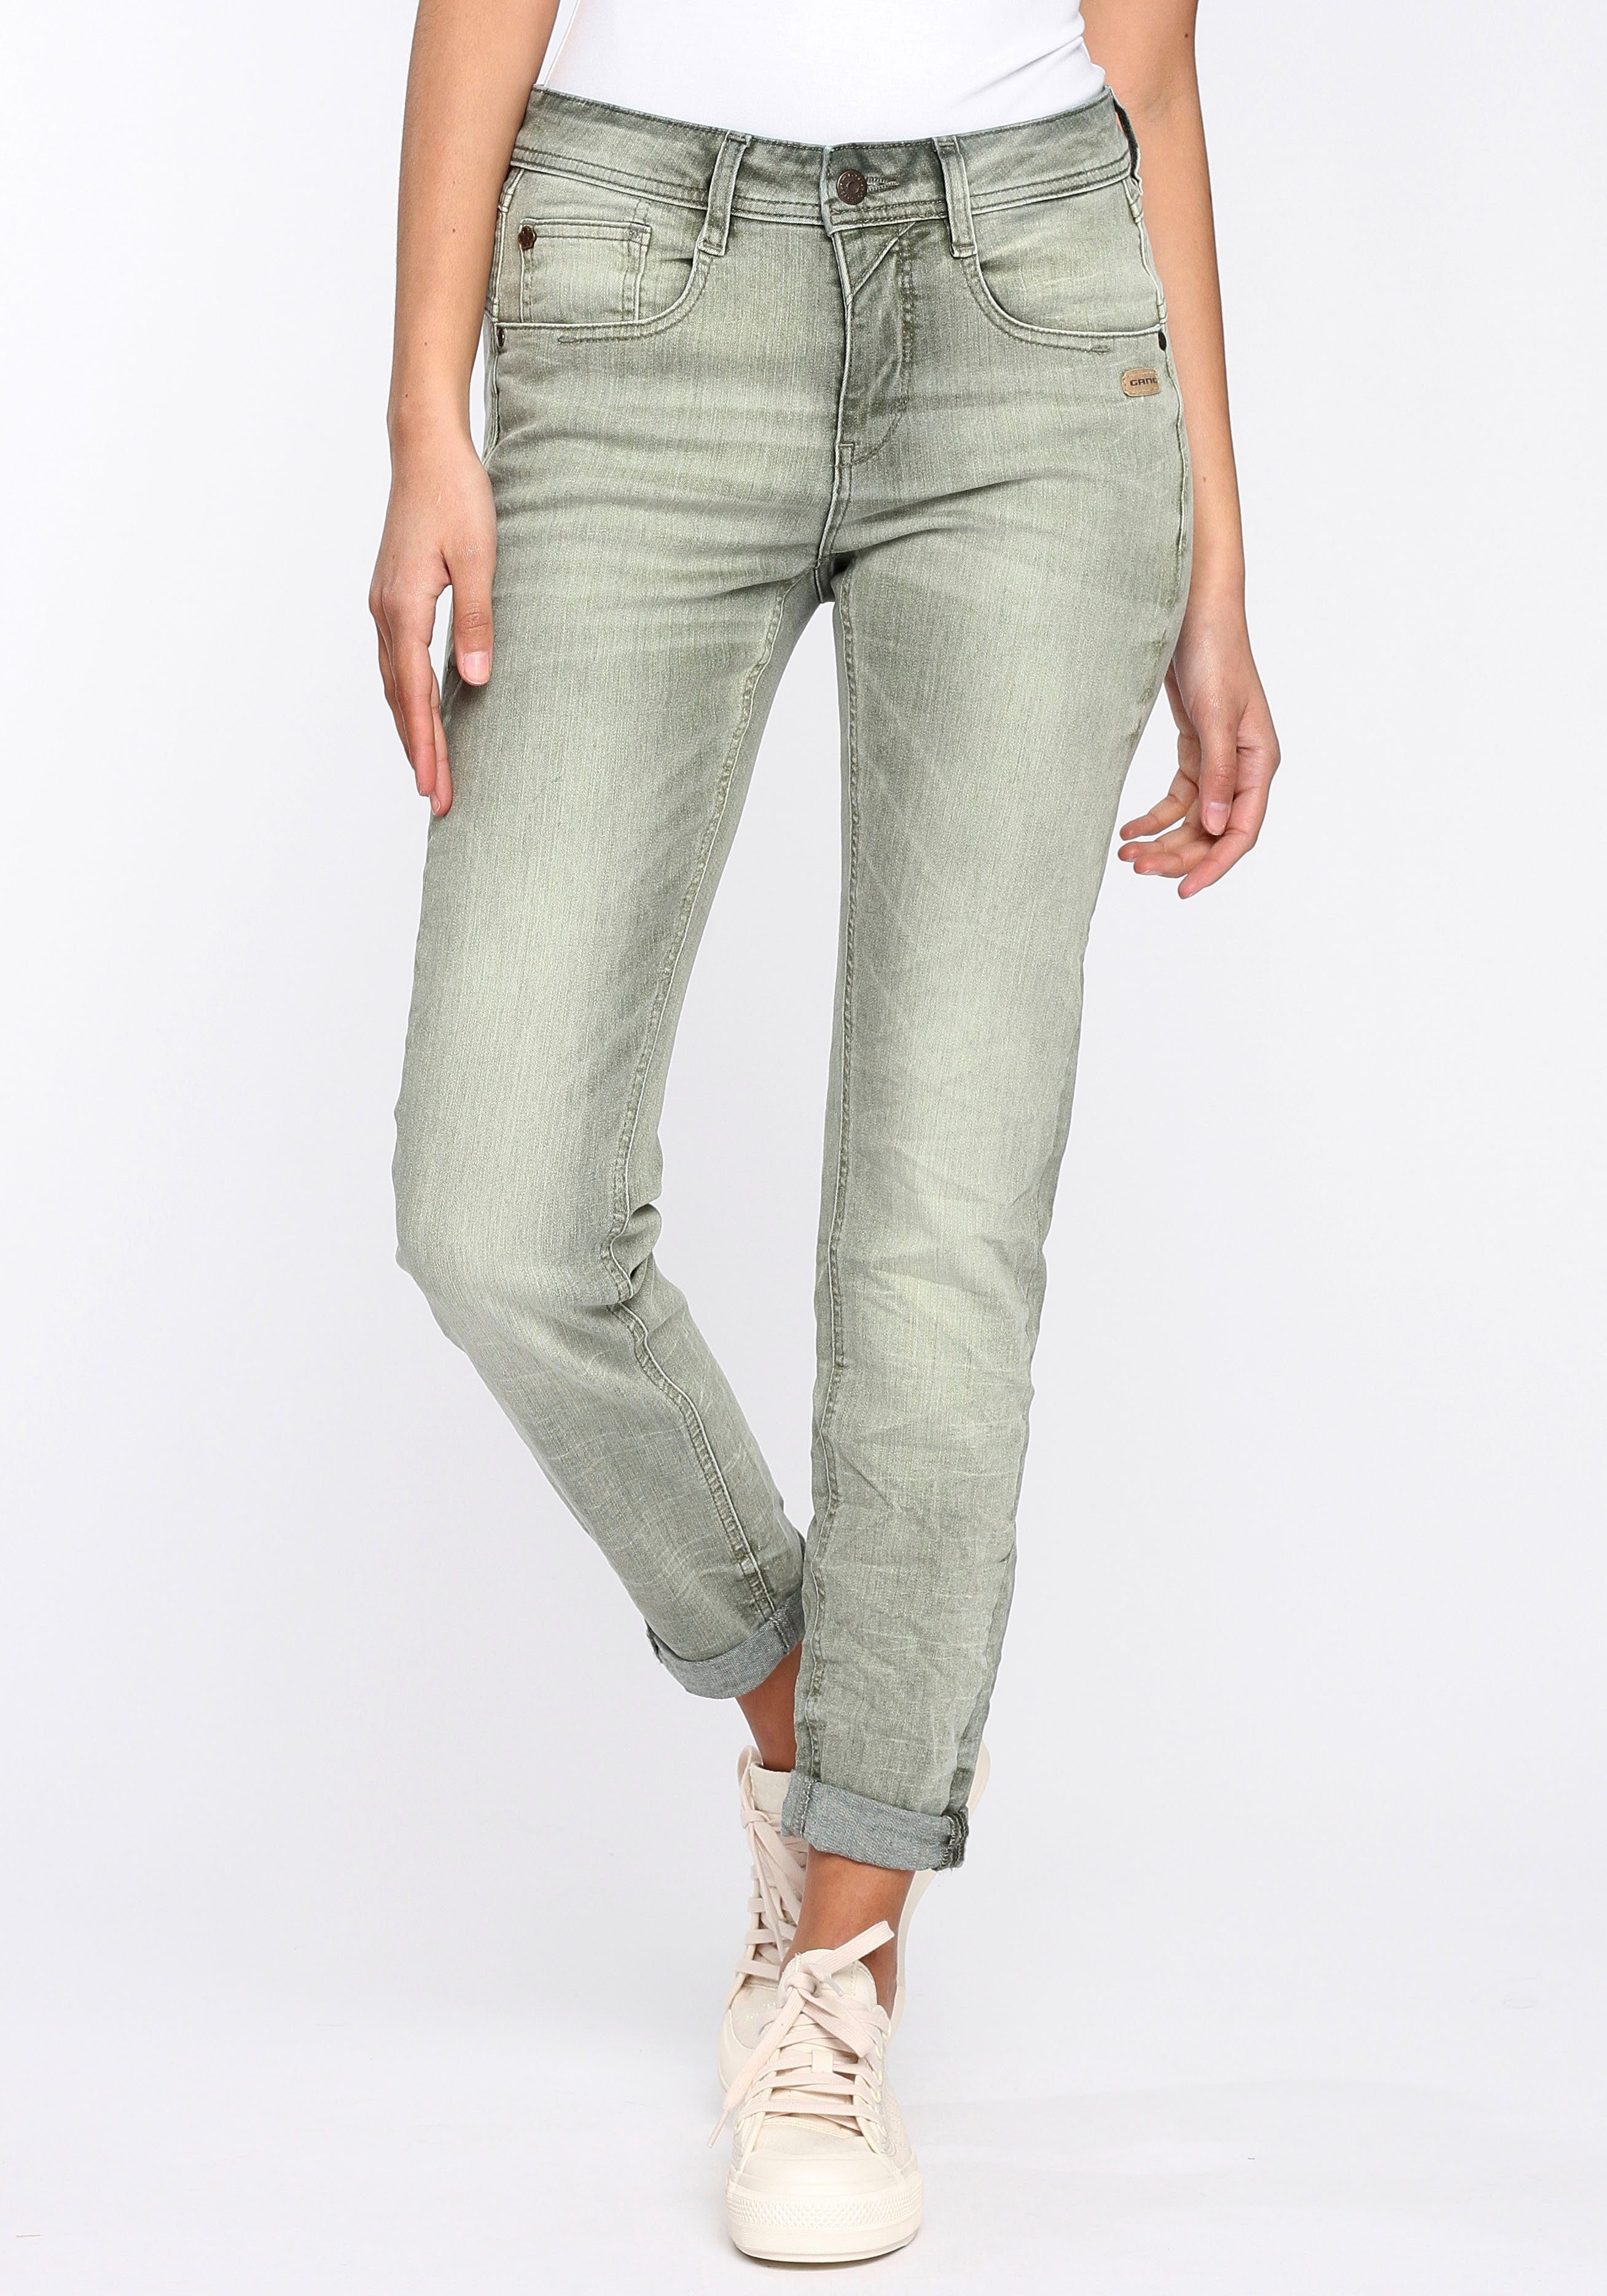 Elasthan-Anteil Sitz (grey used) down perfekter Relax-fit-Jeans washed durch 94AMELIE GANG